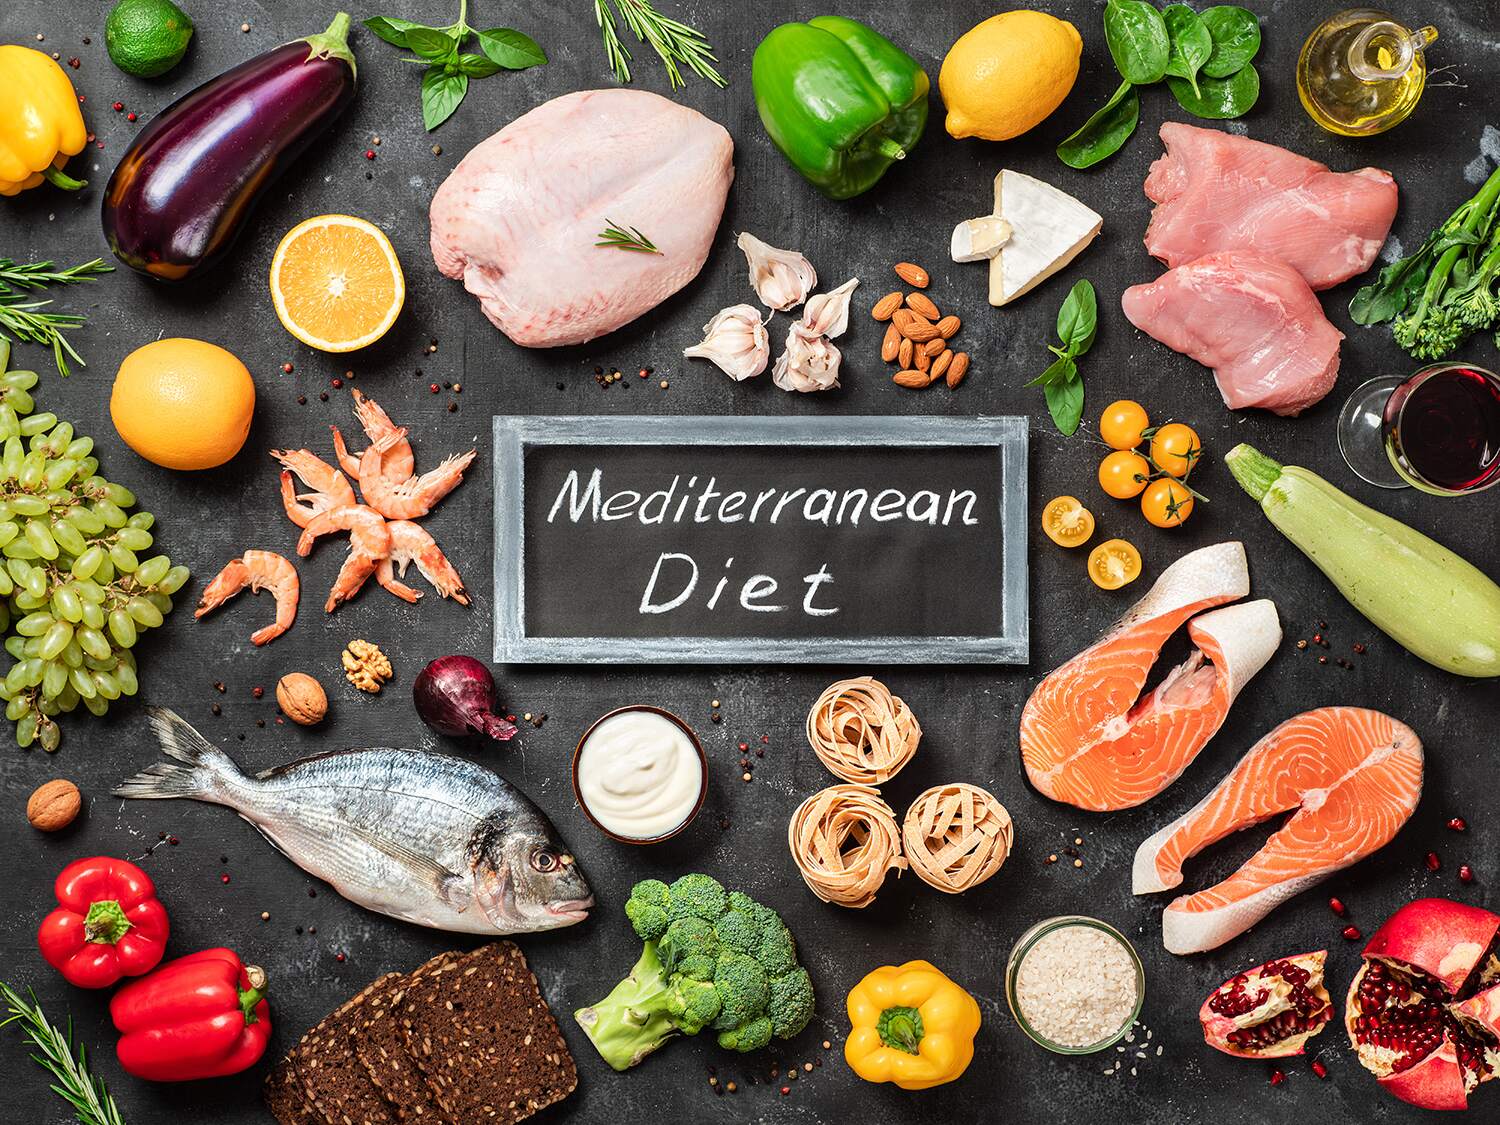 The Mediterranean Diet: A Strategy To Reduce Inflammation